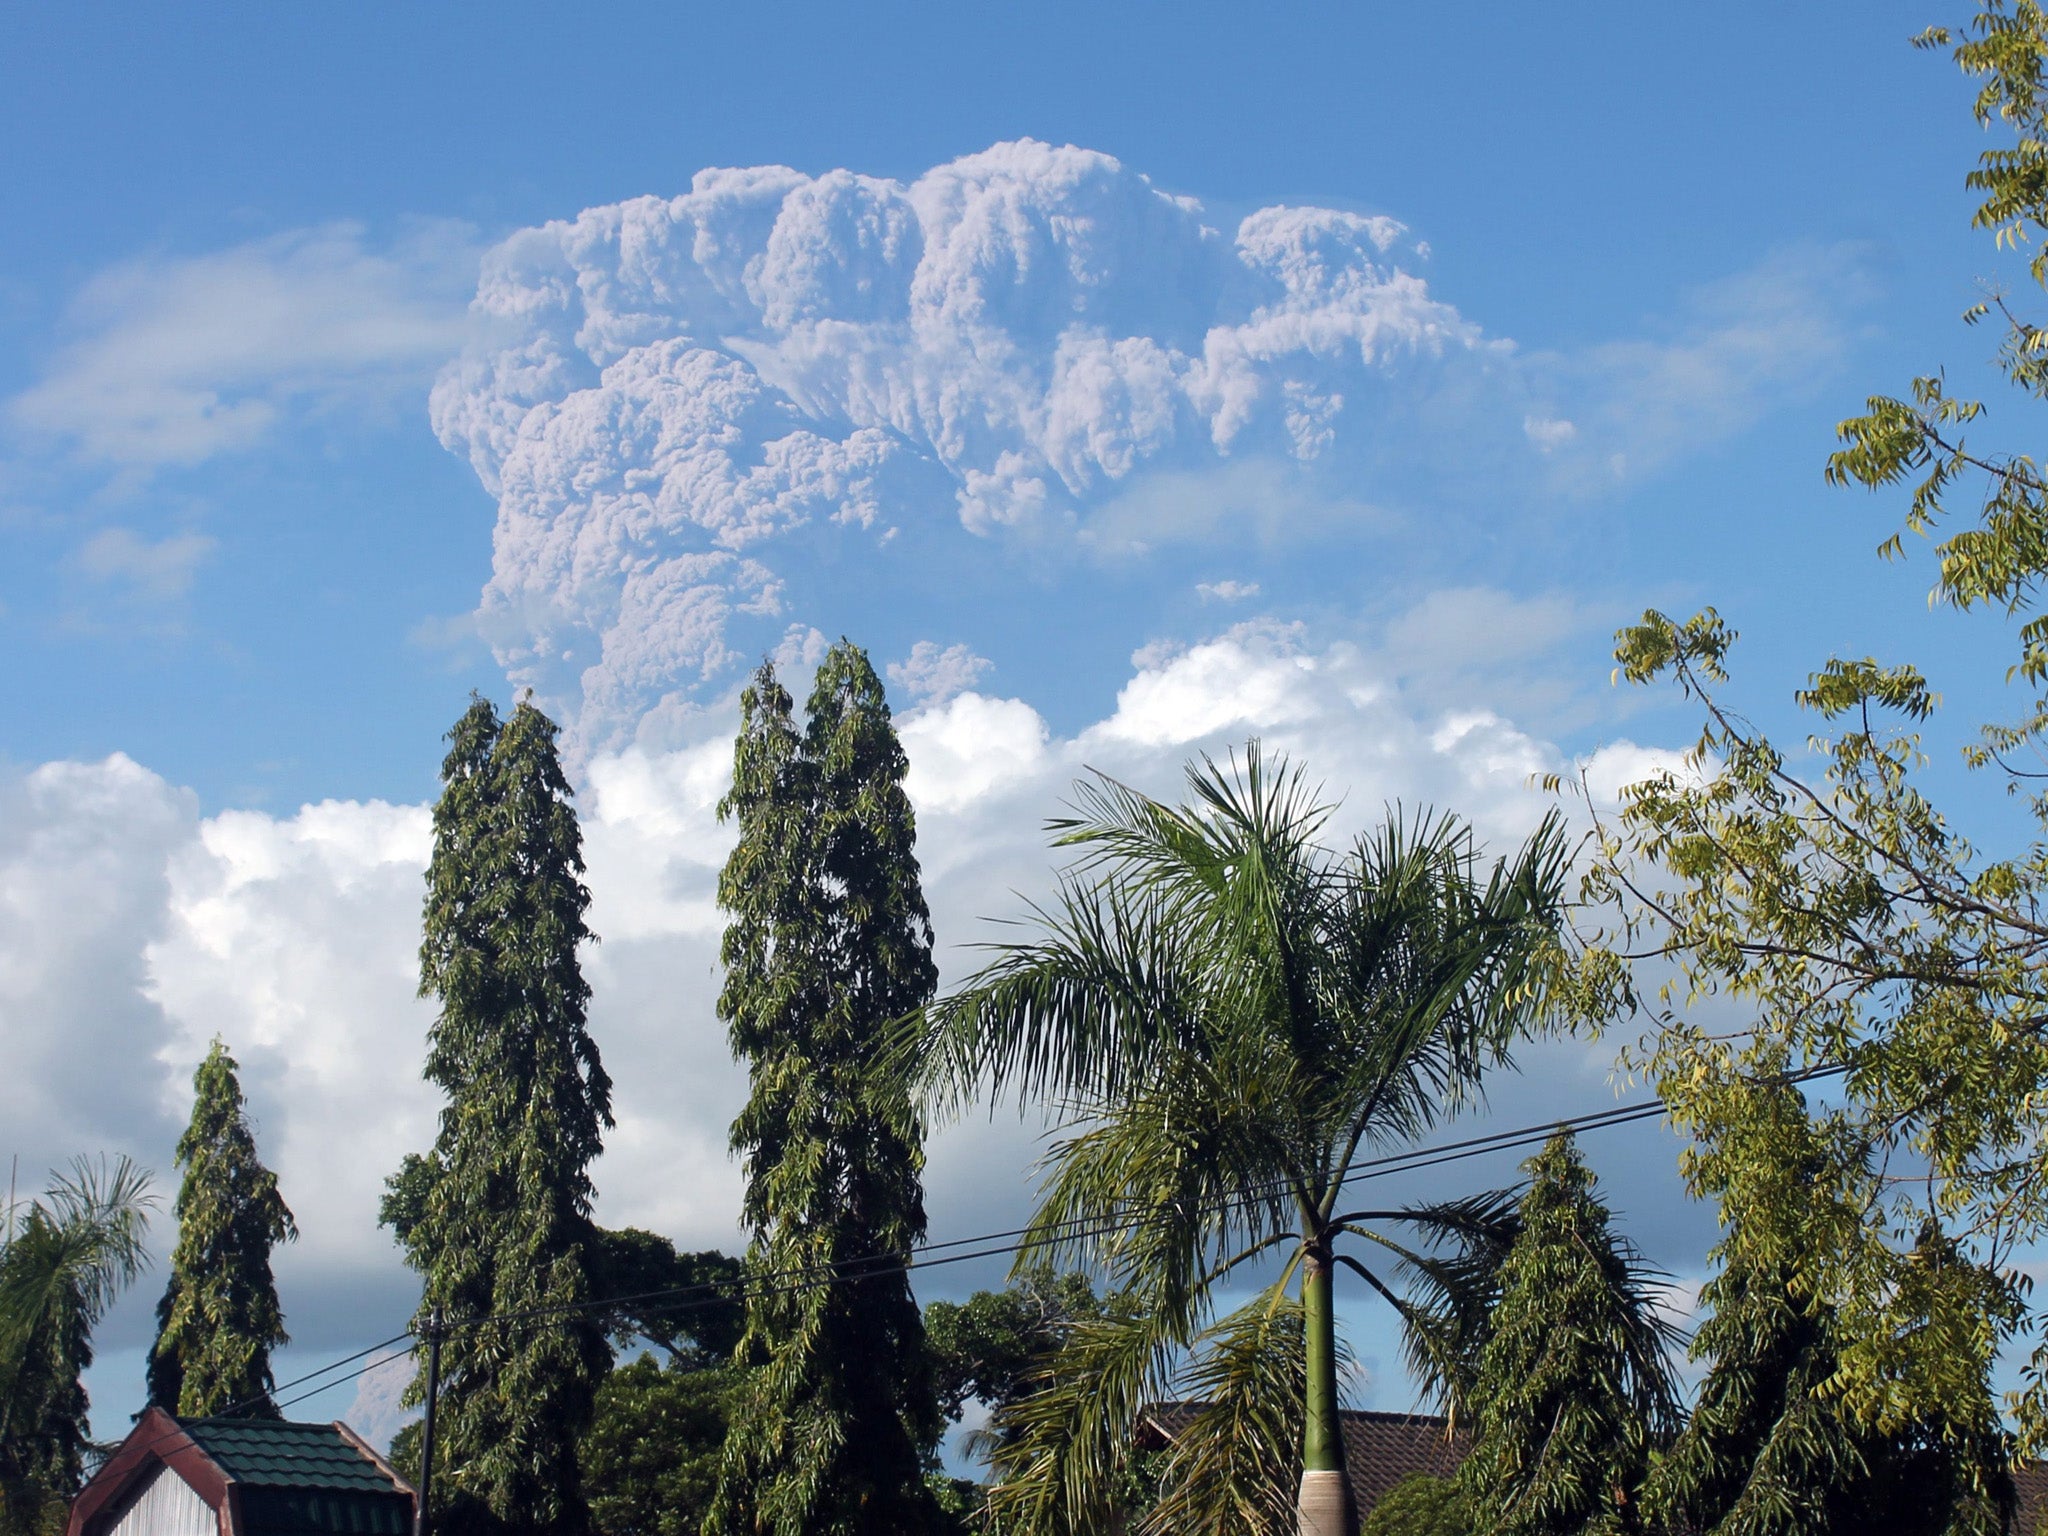 Sangeang Api in Indonesia erupts